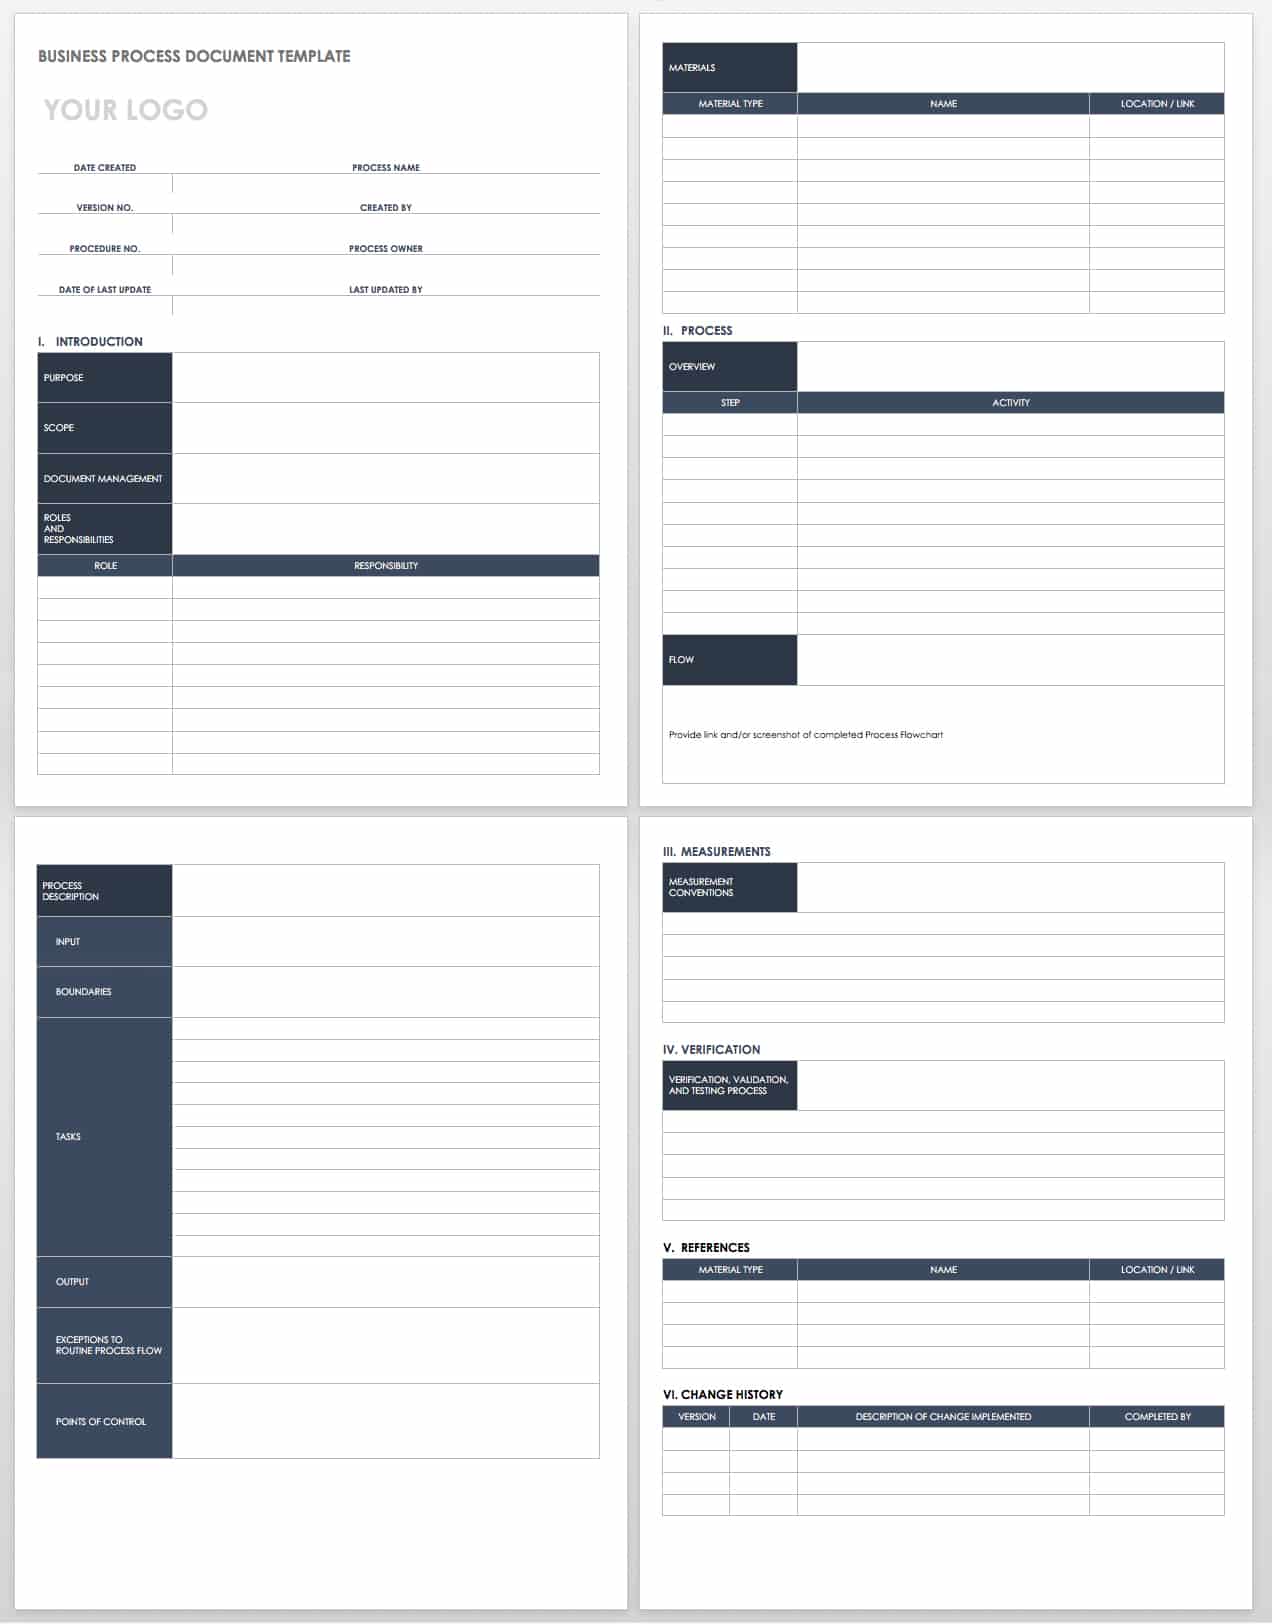 Free Process Document Templates  Smartsheet With Regard To Business Process Discovery Template